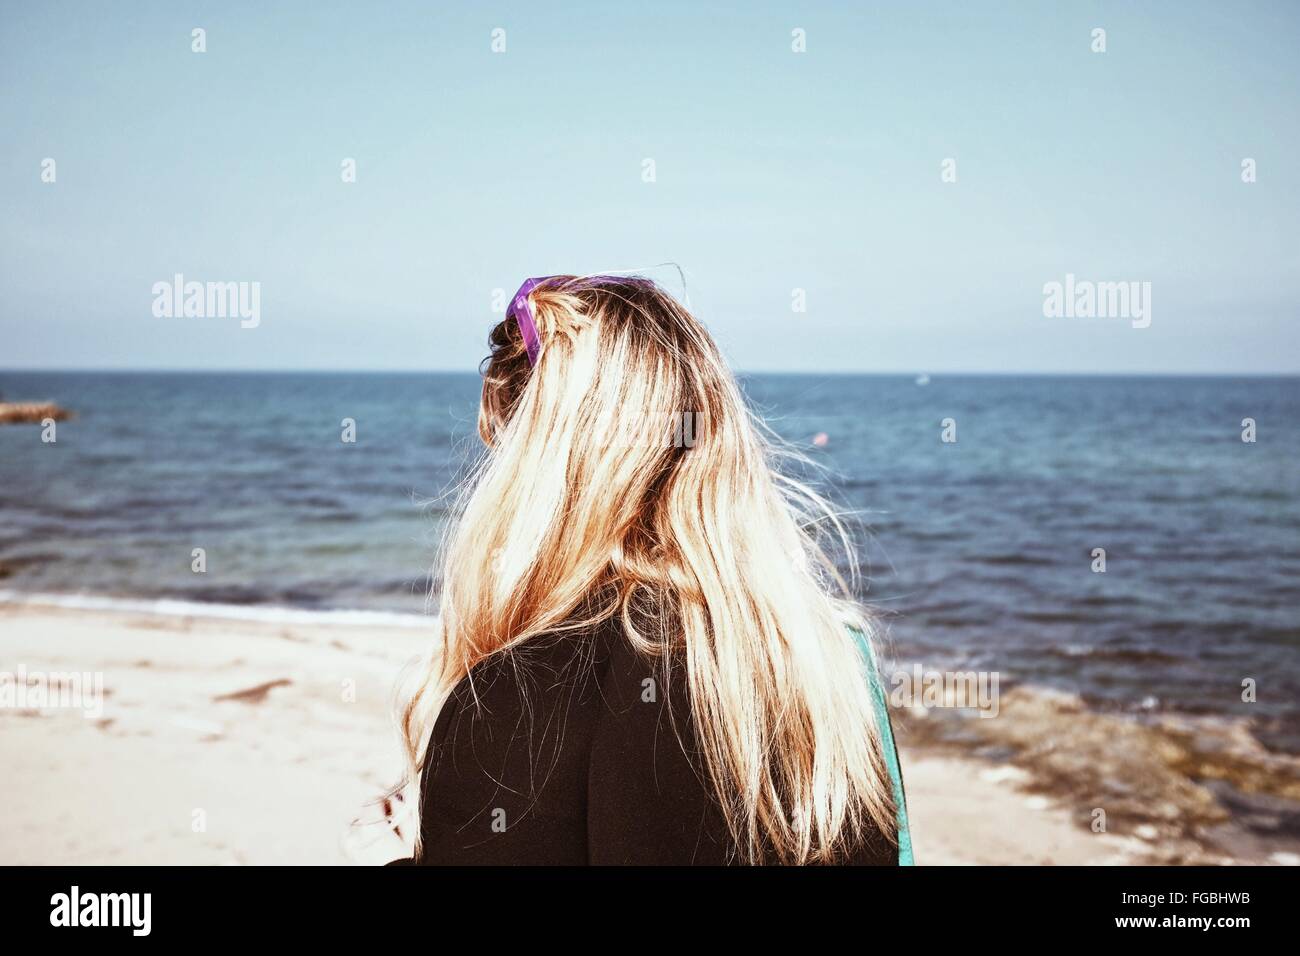 Rear View Of Woman On Beach Against Clear Sky Stock Photo